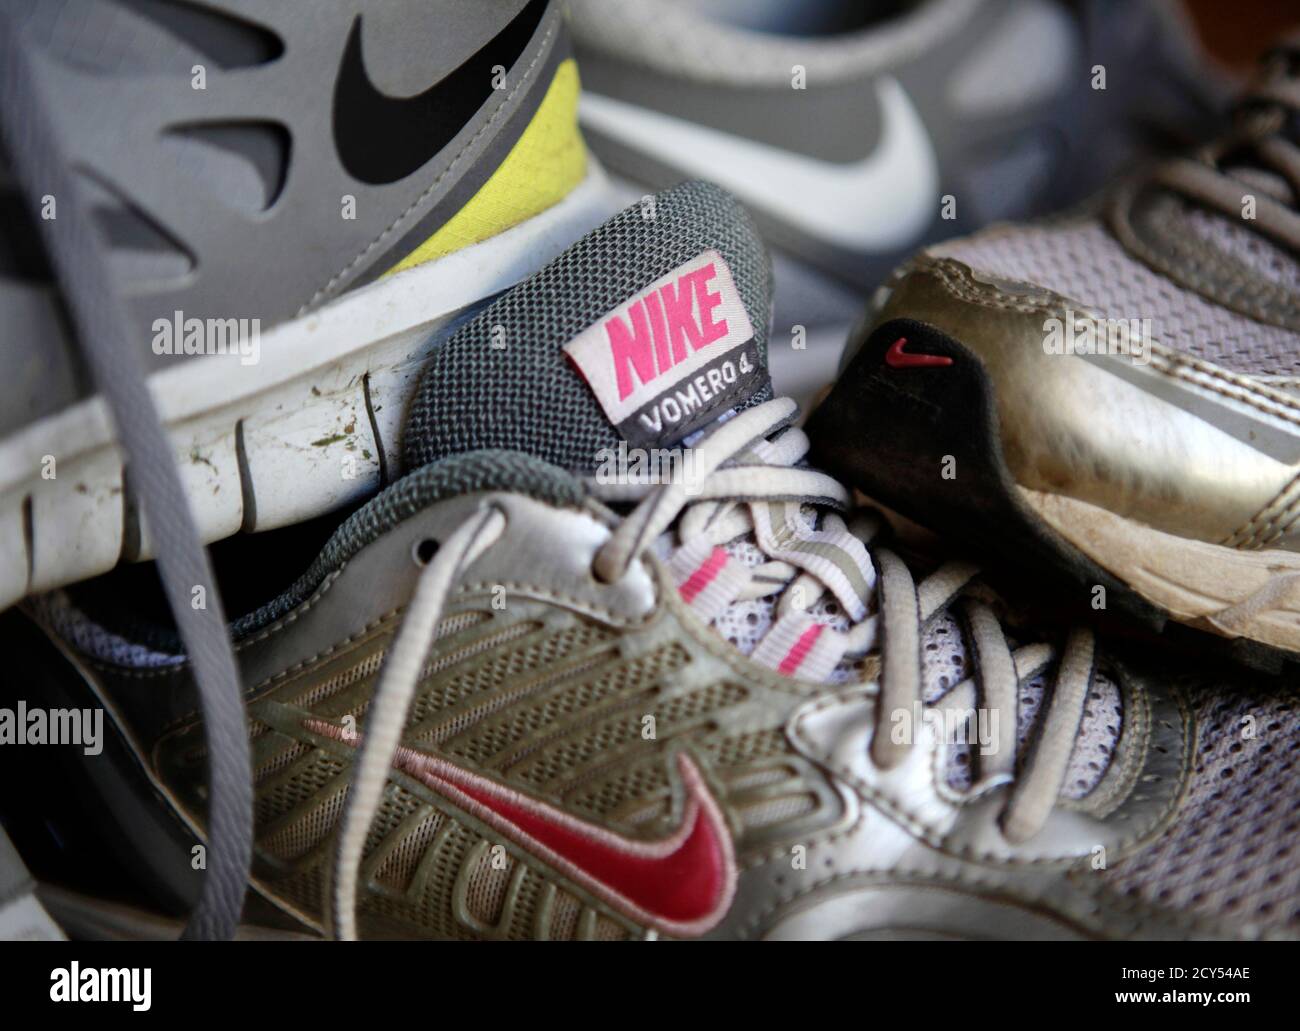 Nike running are seen in Angeles, California March 20, 2012. Nike, to